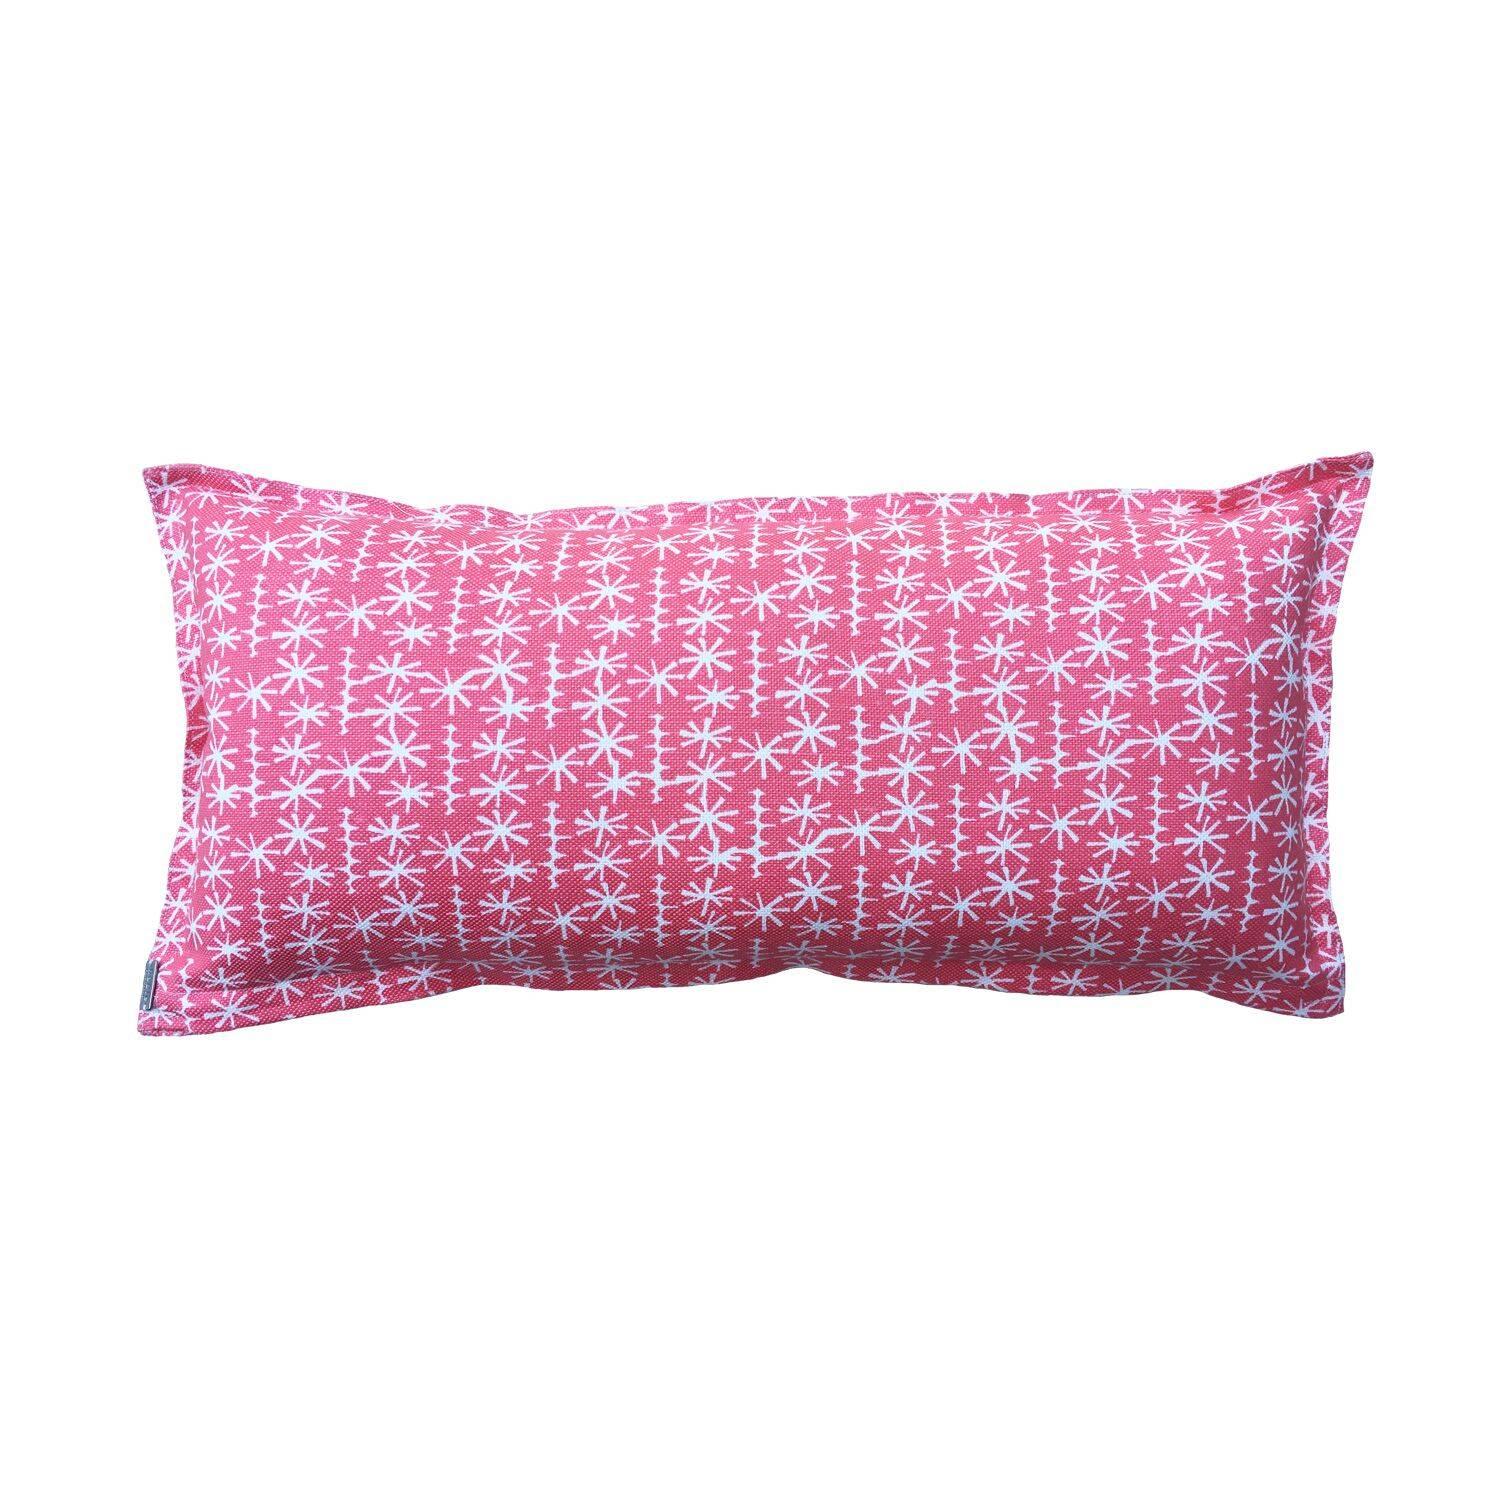 Dahlia Star Ticket on Oyster Cotton Linen Pillow For Sale